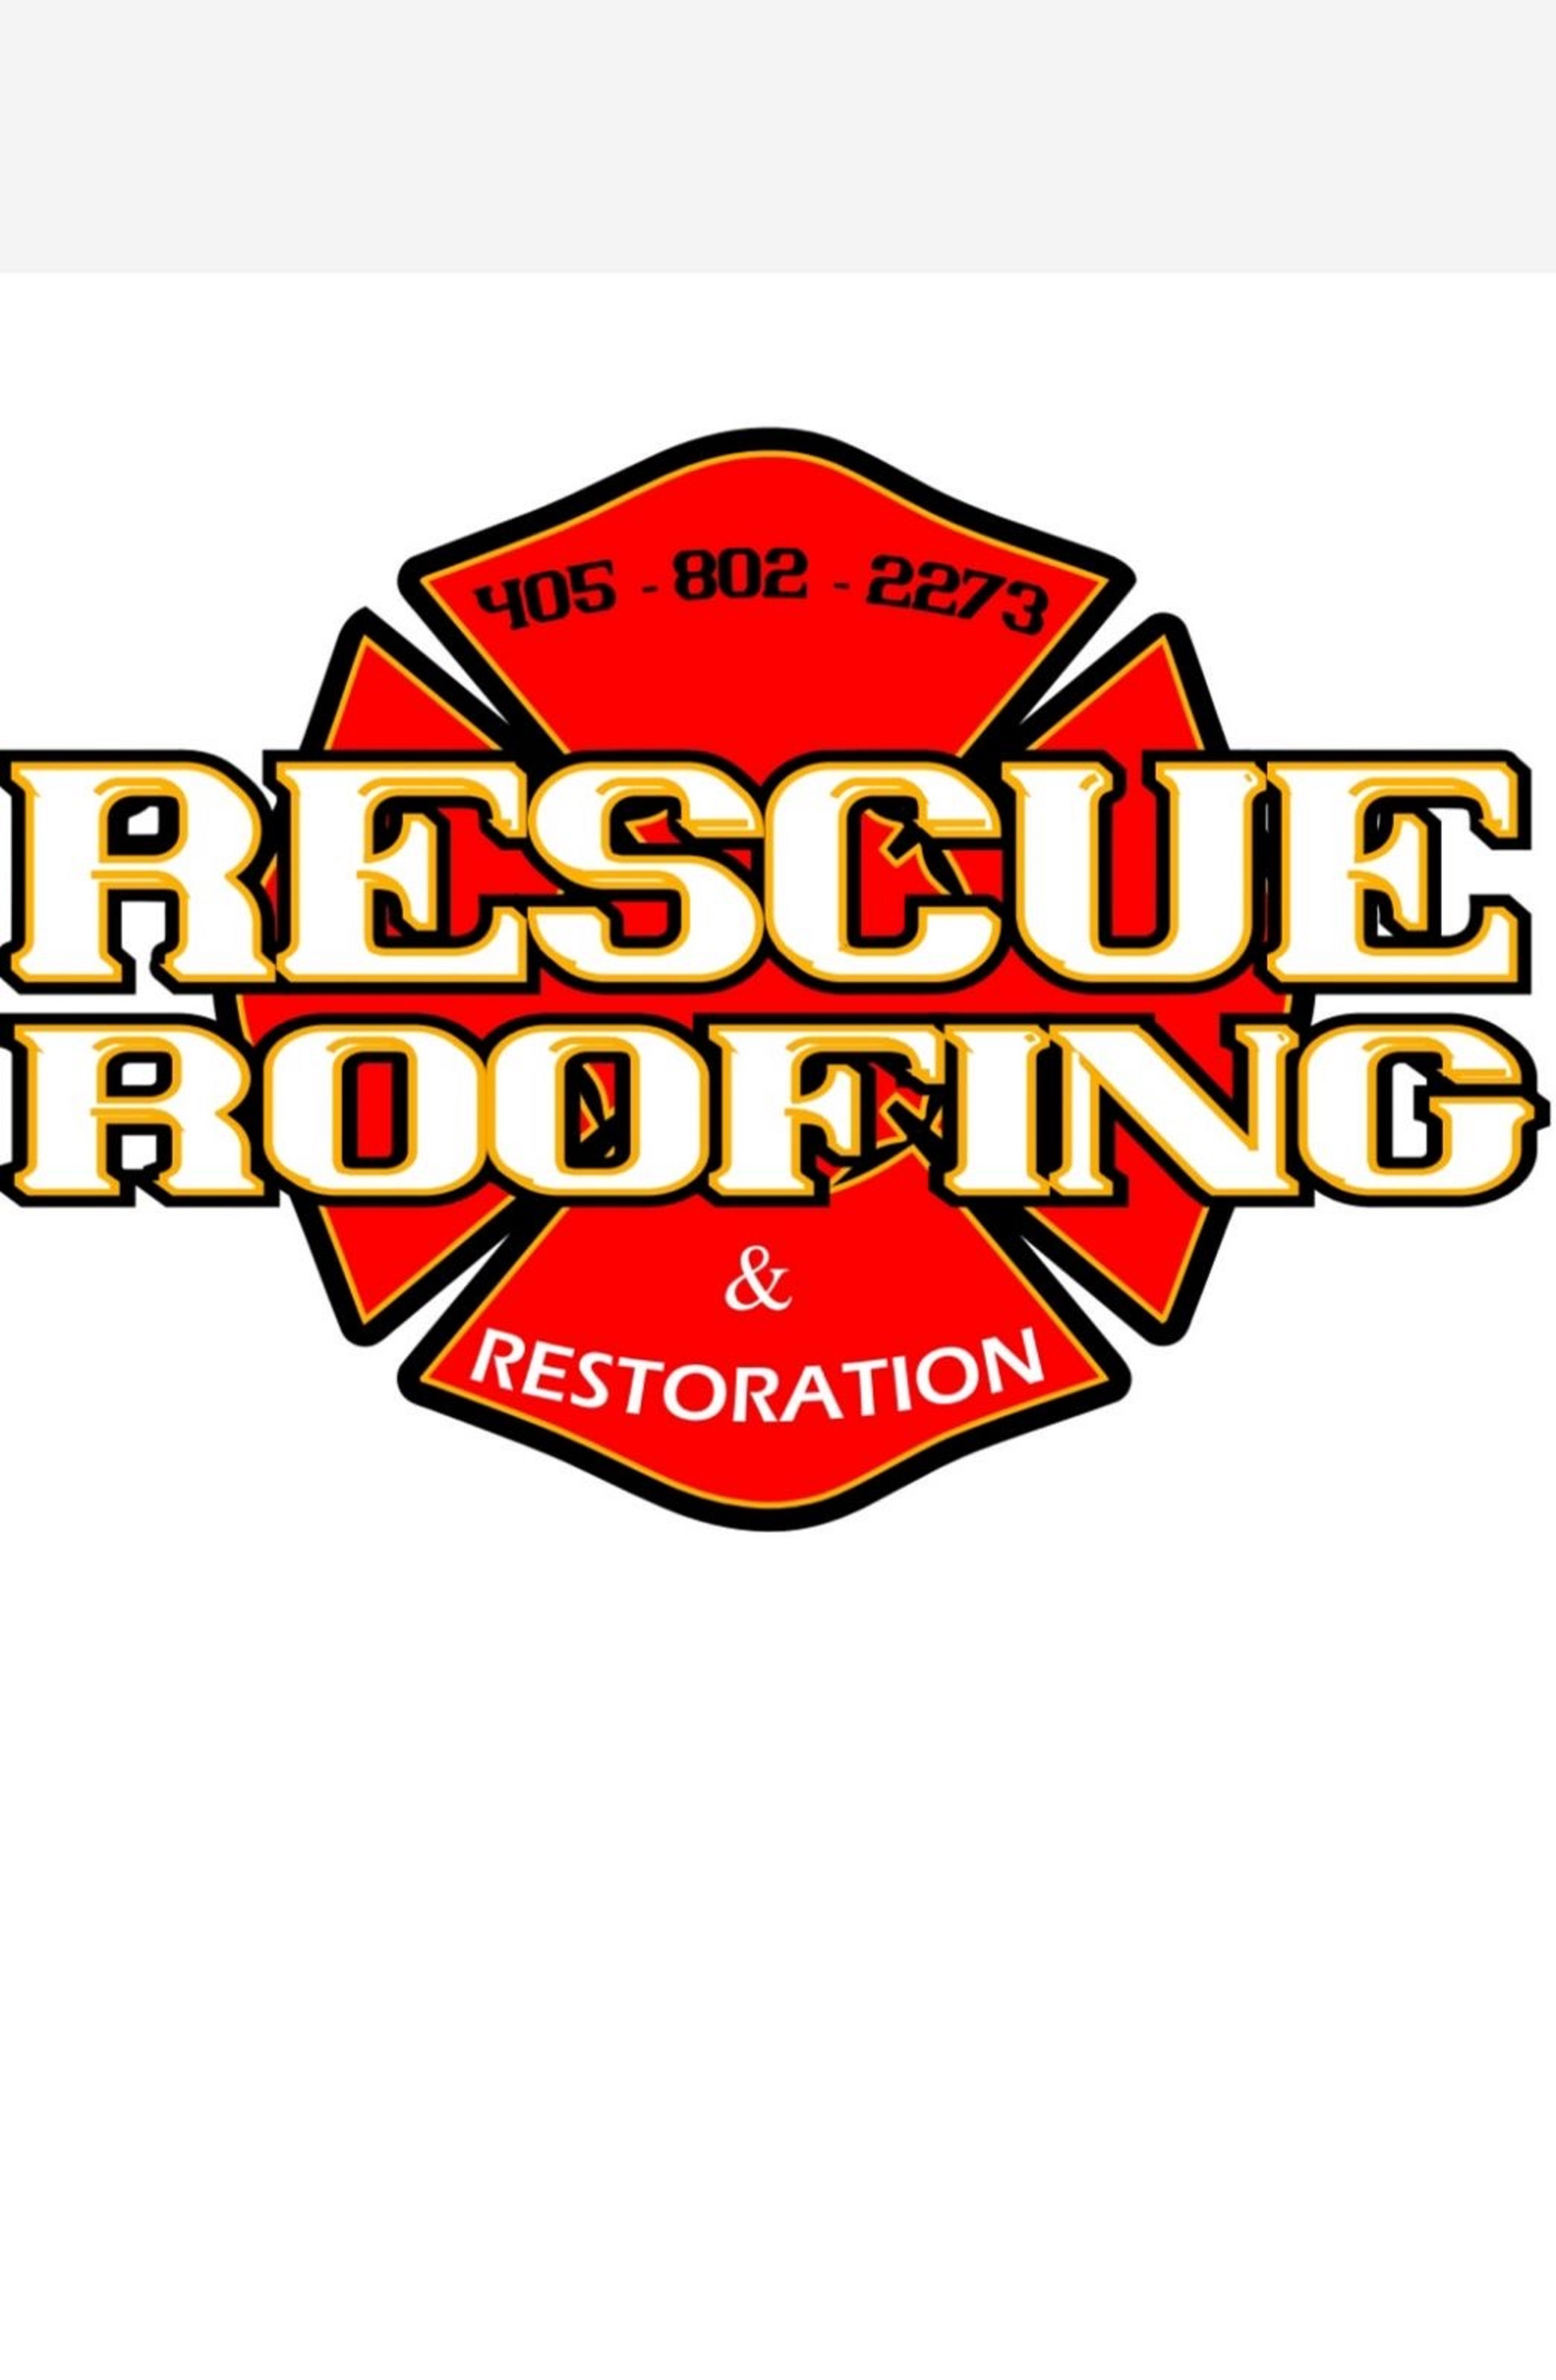 RESCUE ROOFING AND RESTORATION LLC Logo